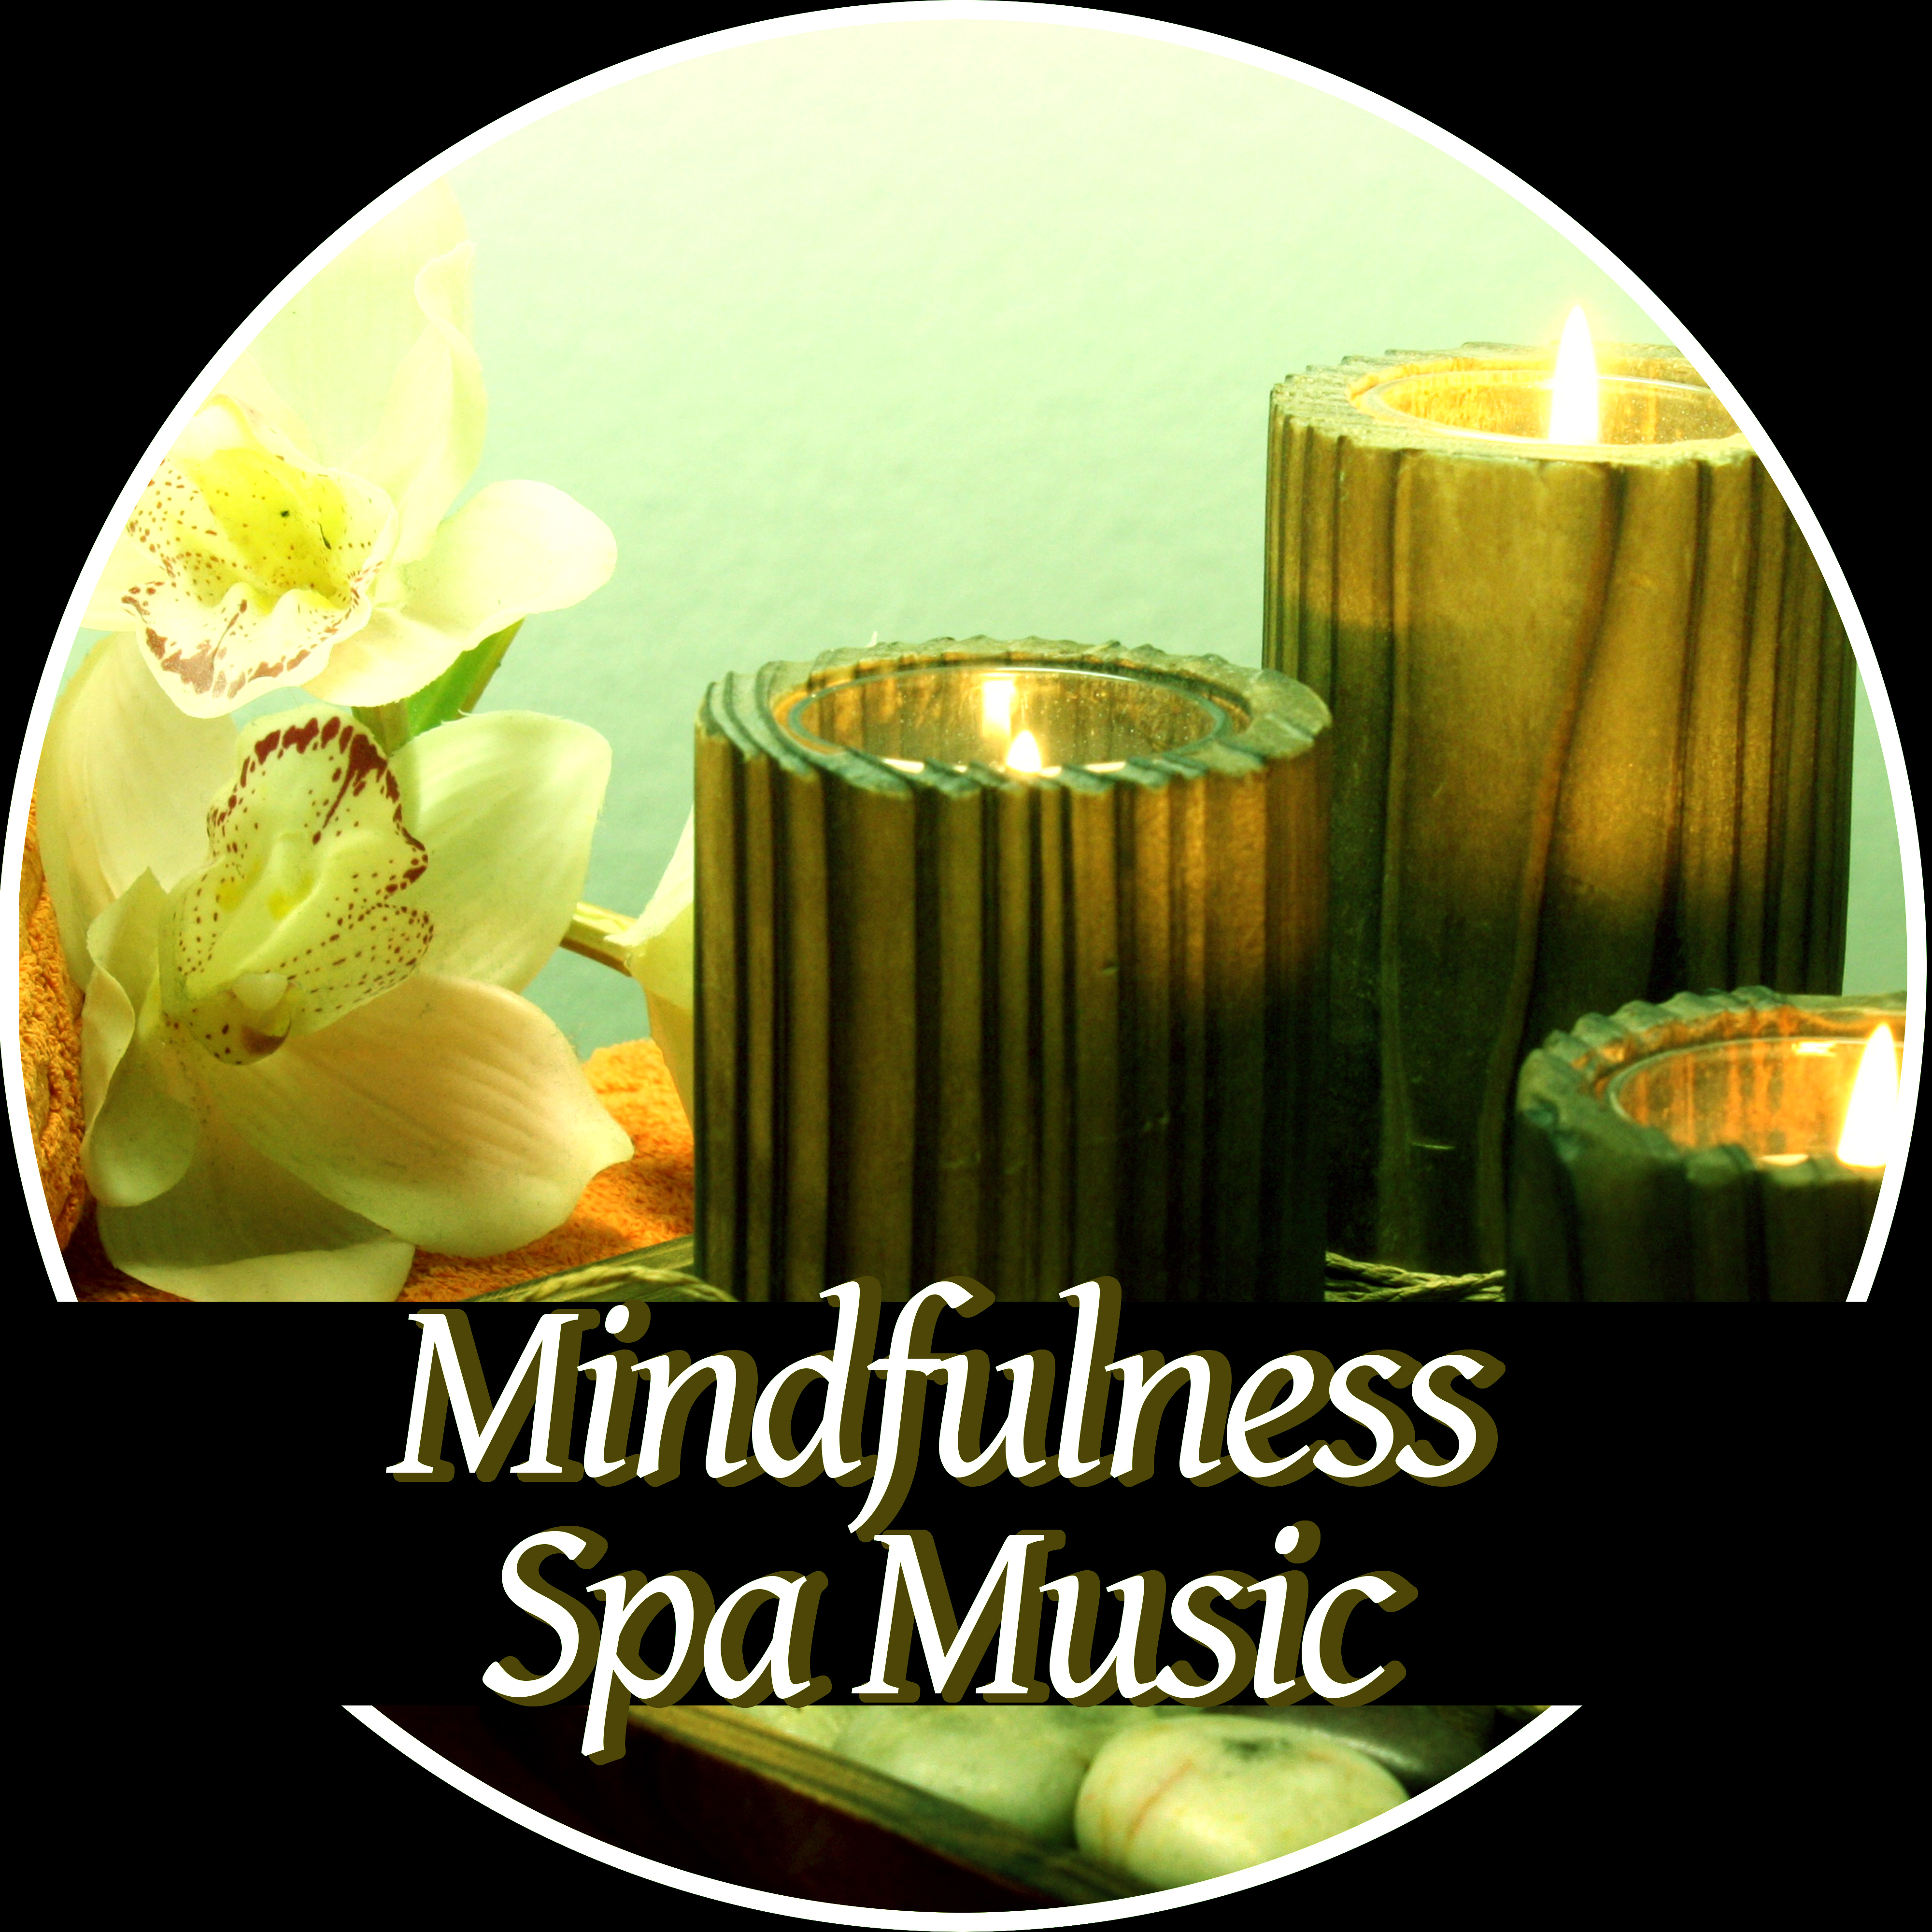 Mindfulness Spa Music - Peaceful Music with the Sounds of Nature, Deep Zen Meditation & Well Being, Mindfulness Meditation Spiritual Healing, Anti Stress